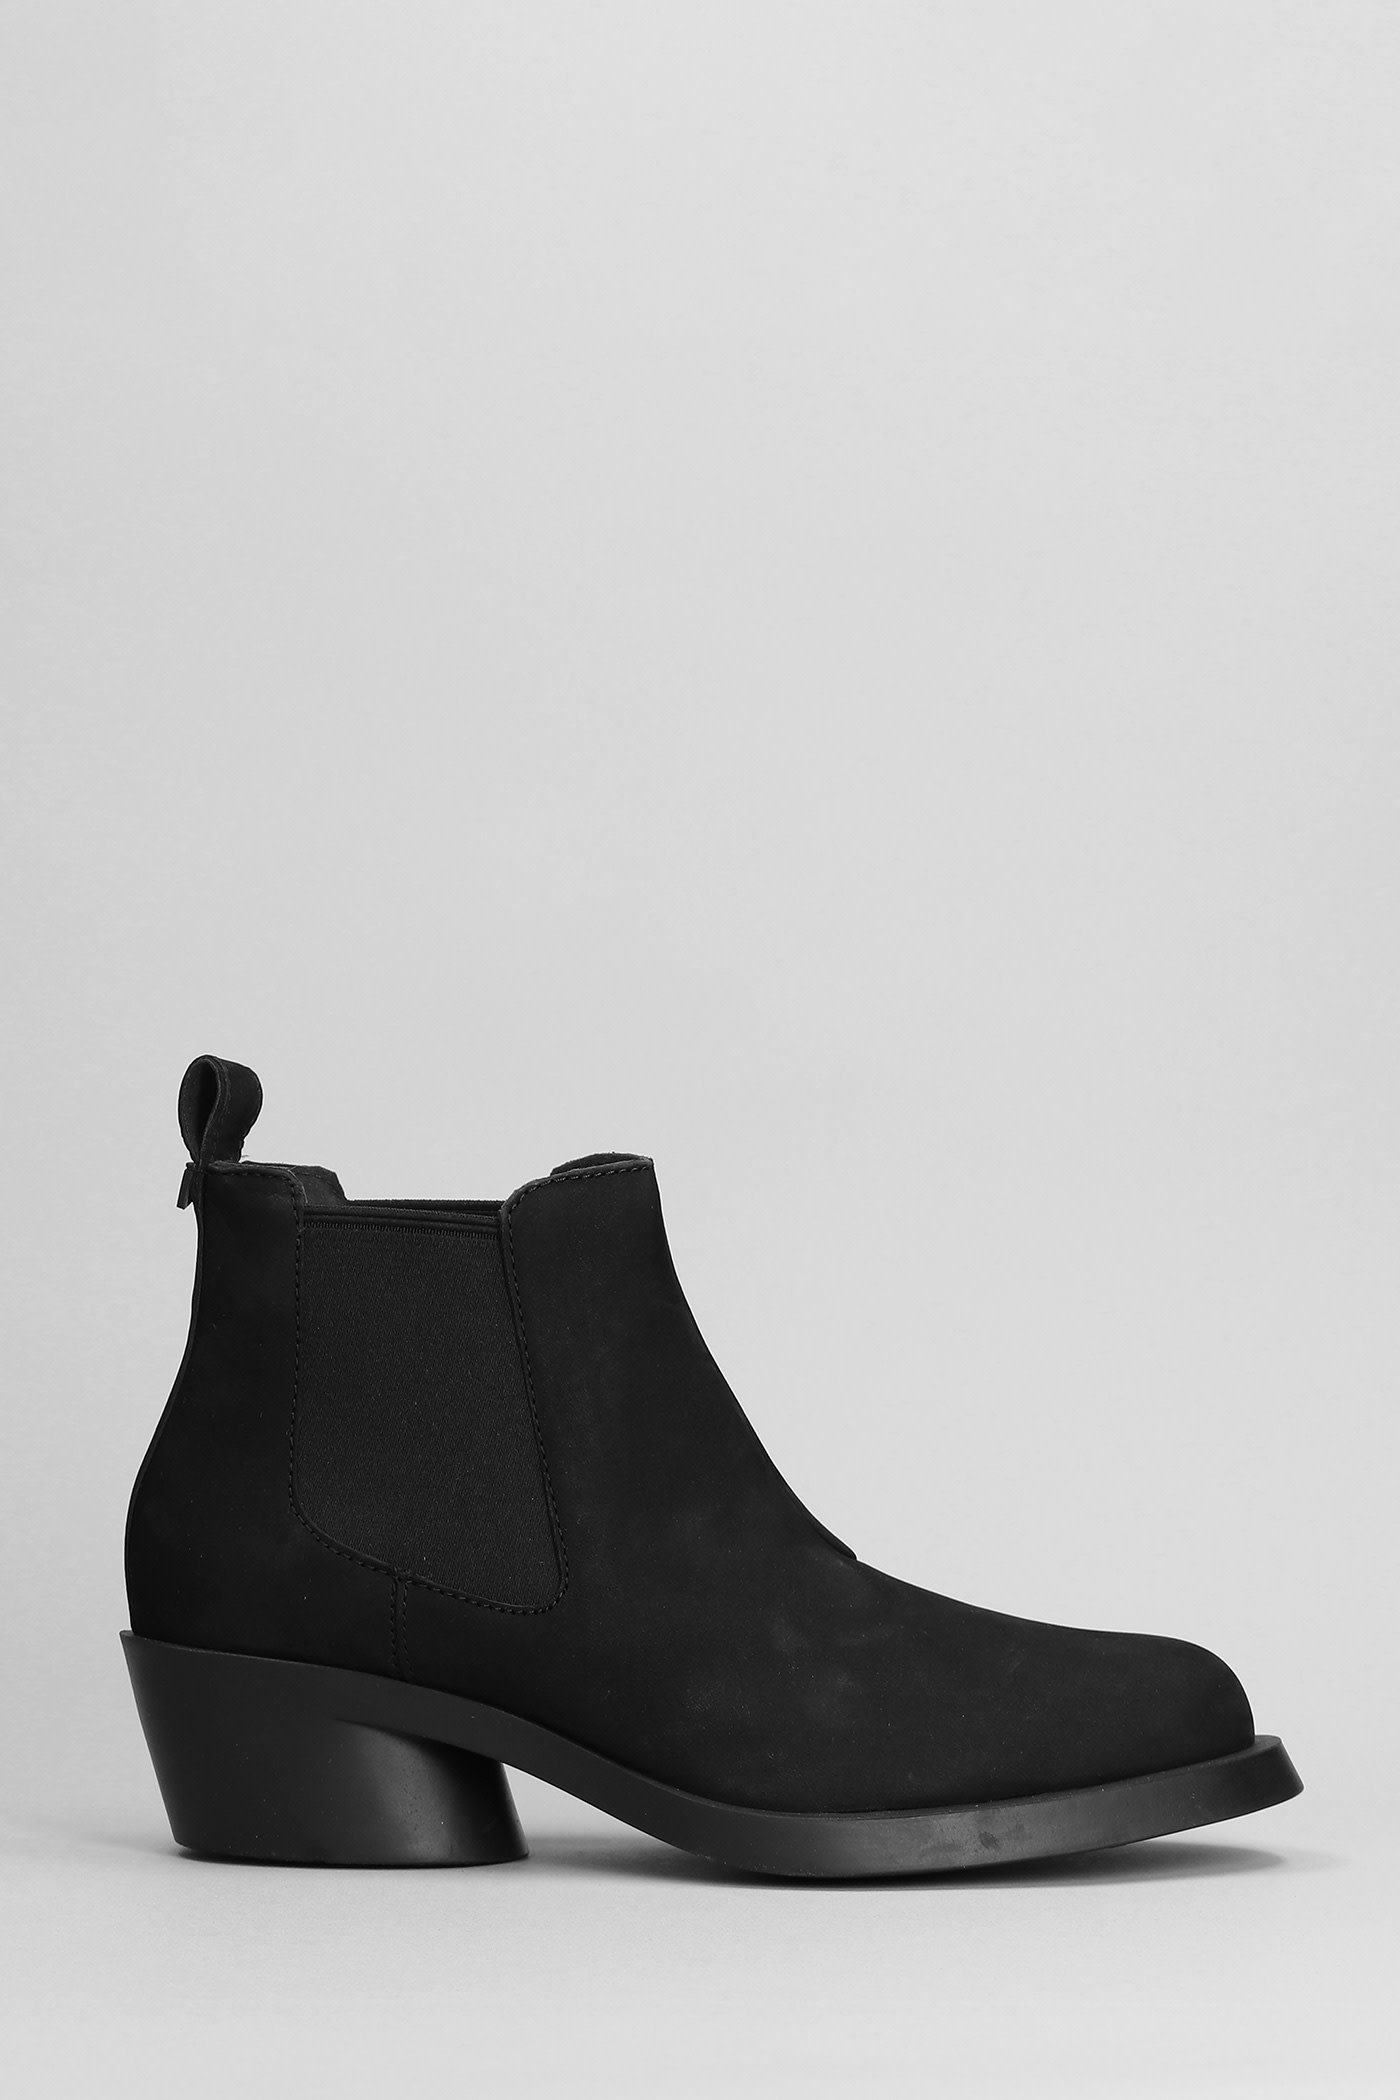 CAMPER BONNIE TEXAN ANKLE BOOTS IN BLACK NUBUCK